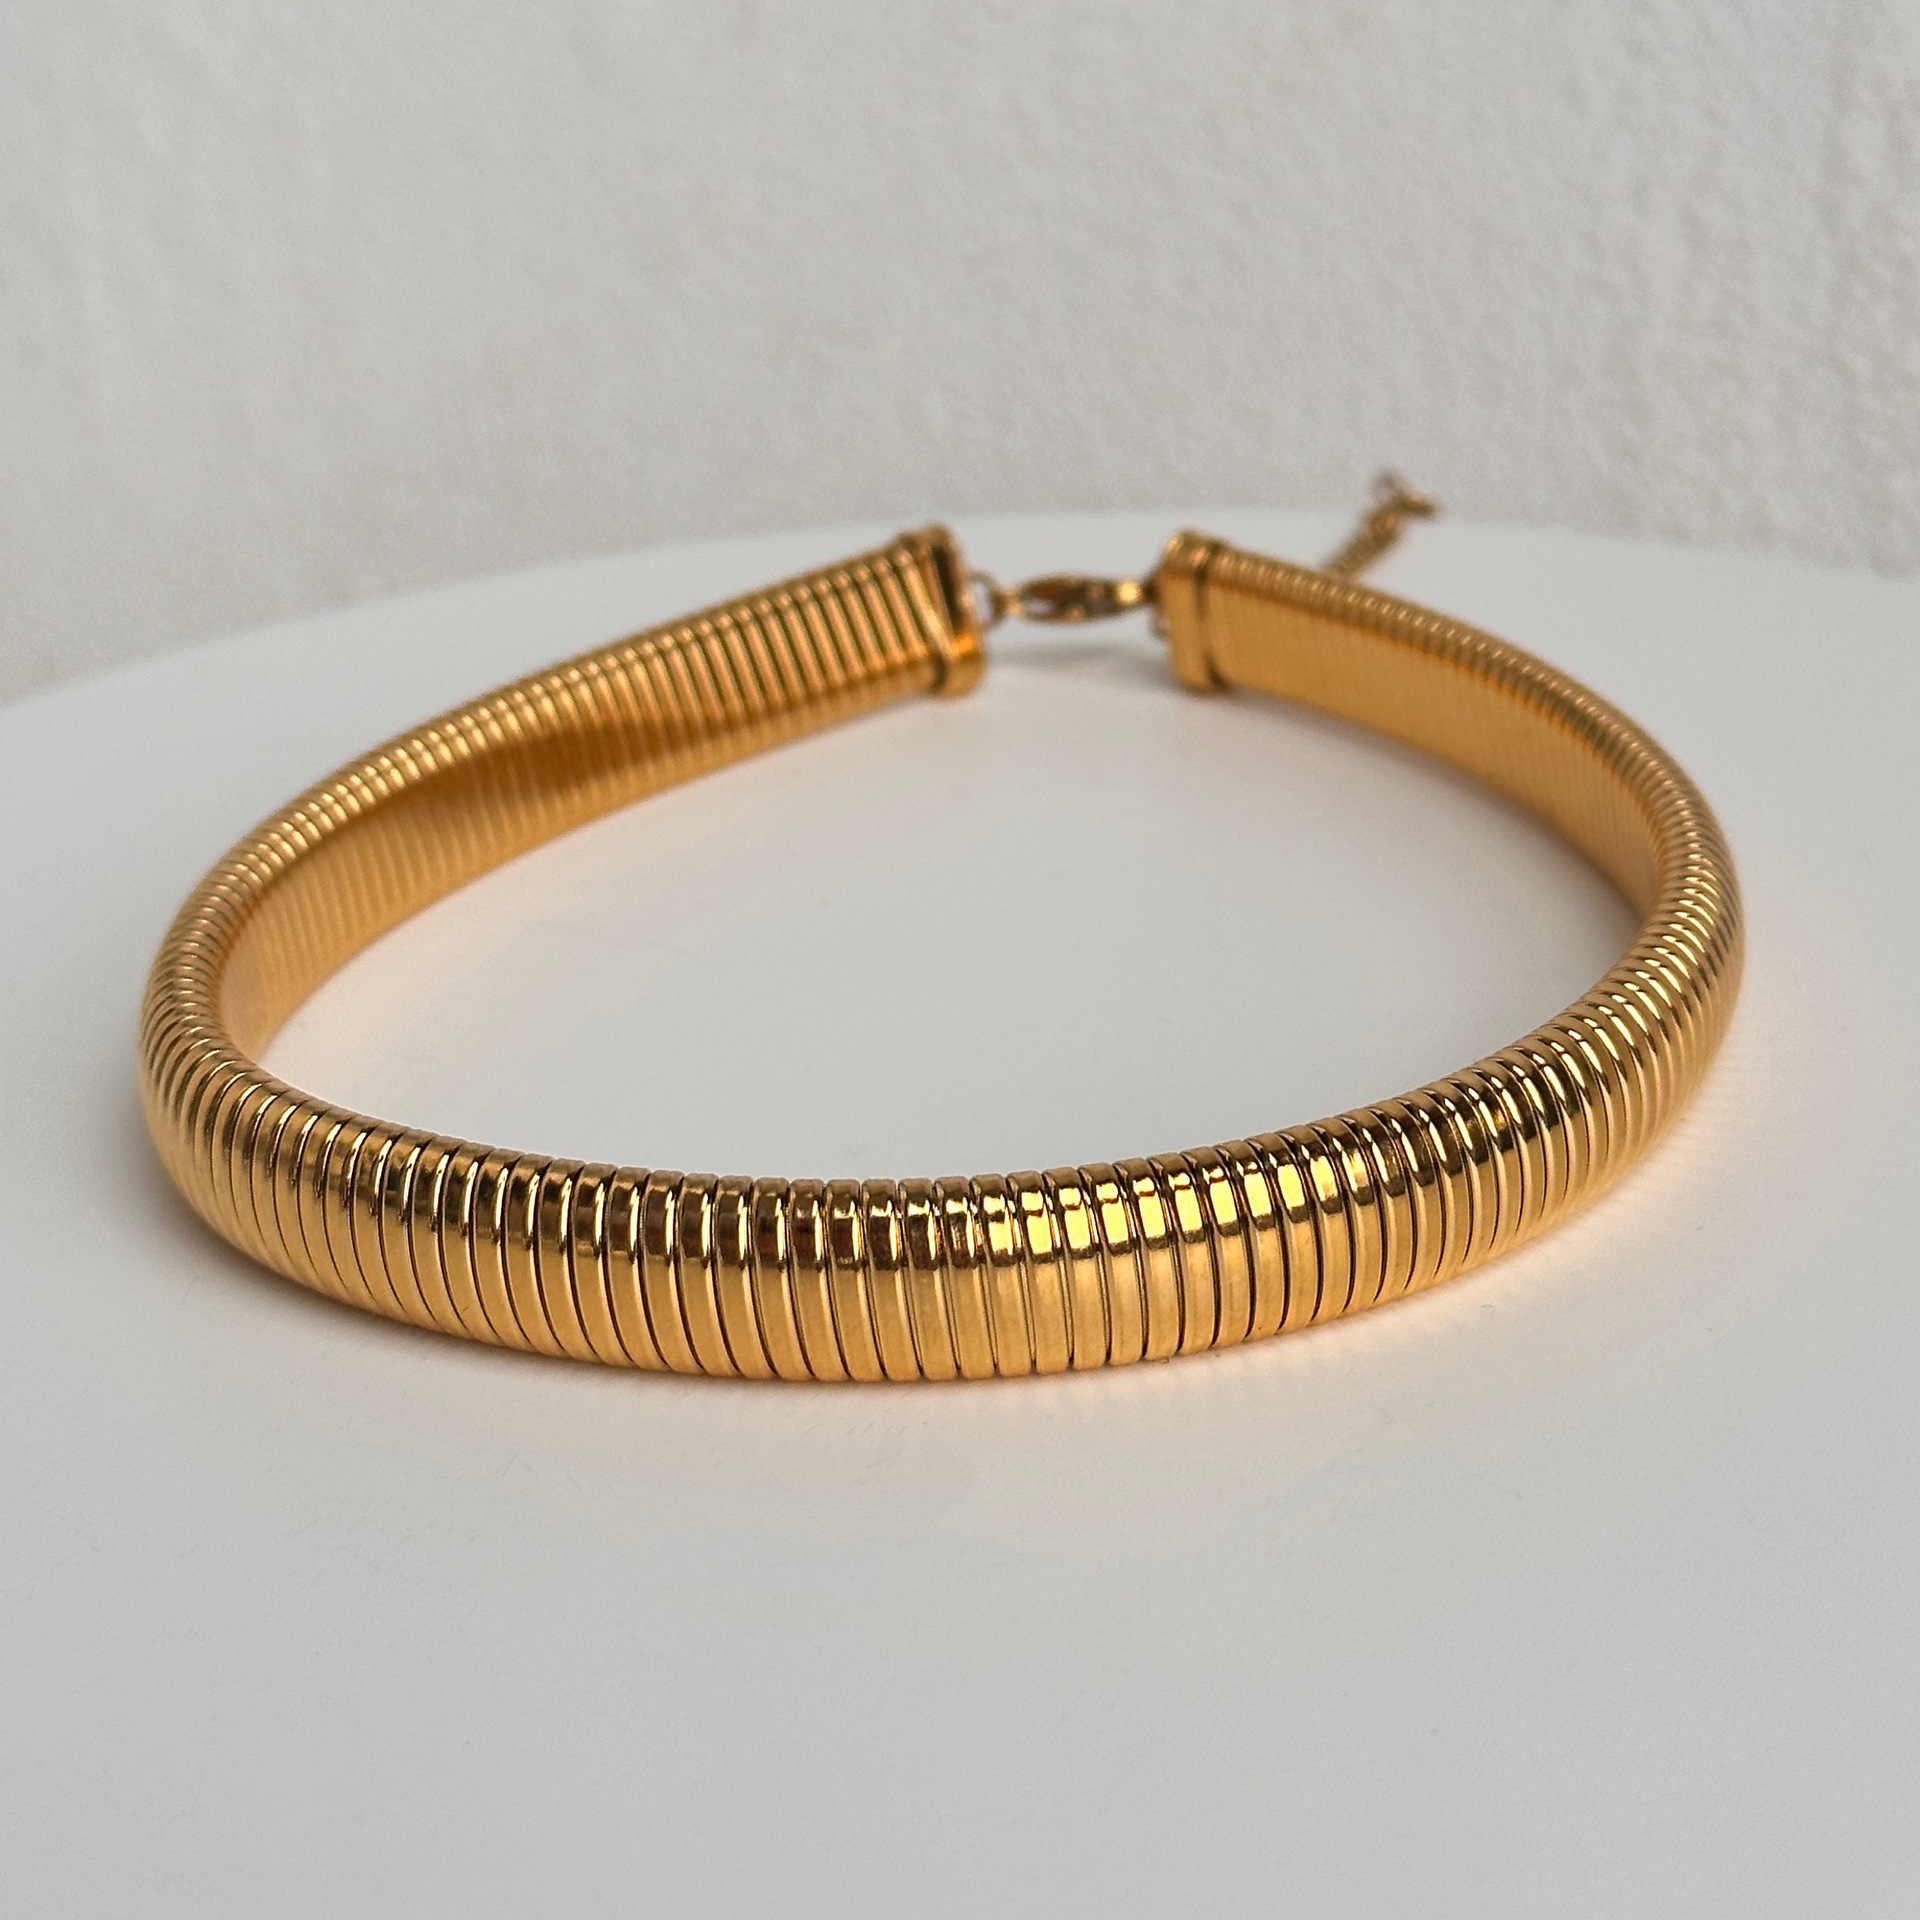 12mm wide gold